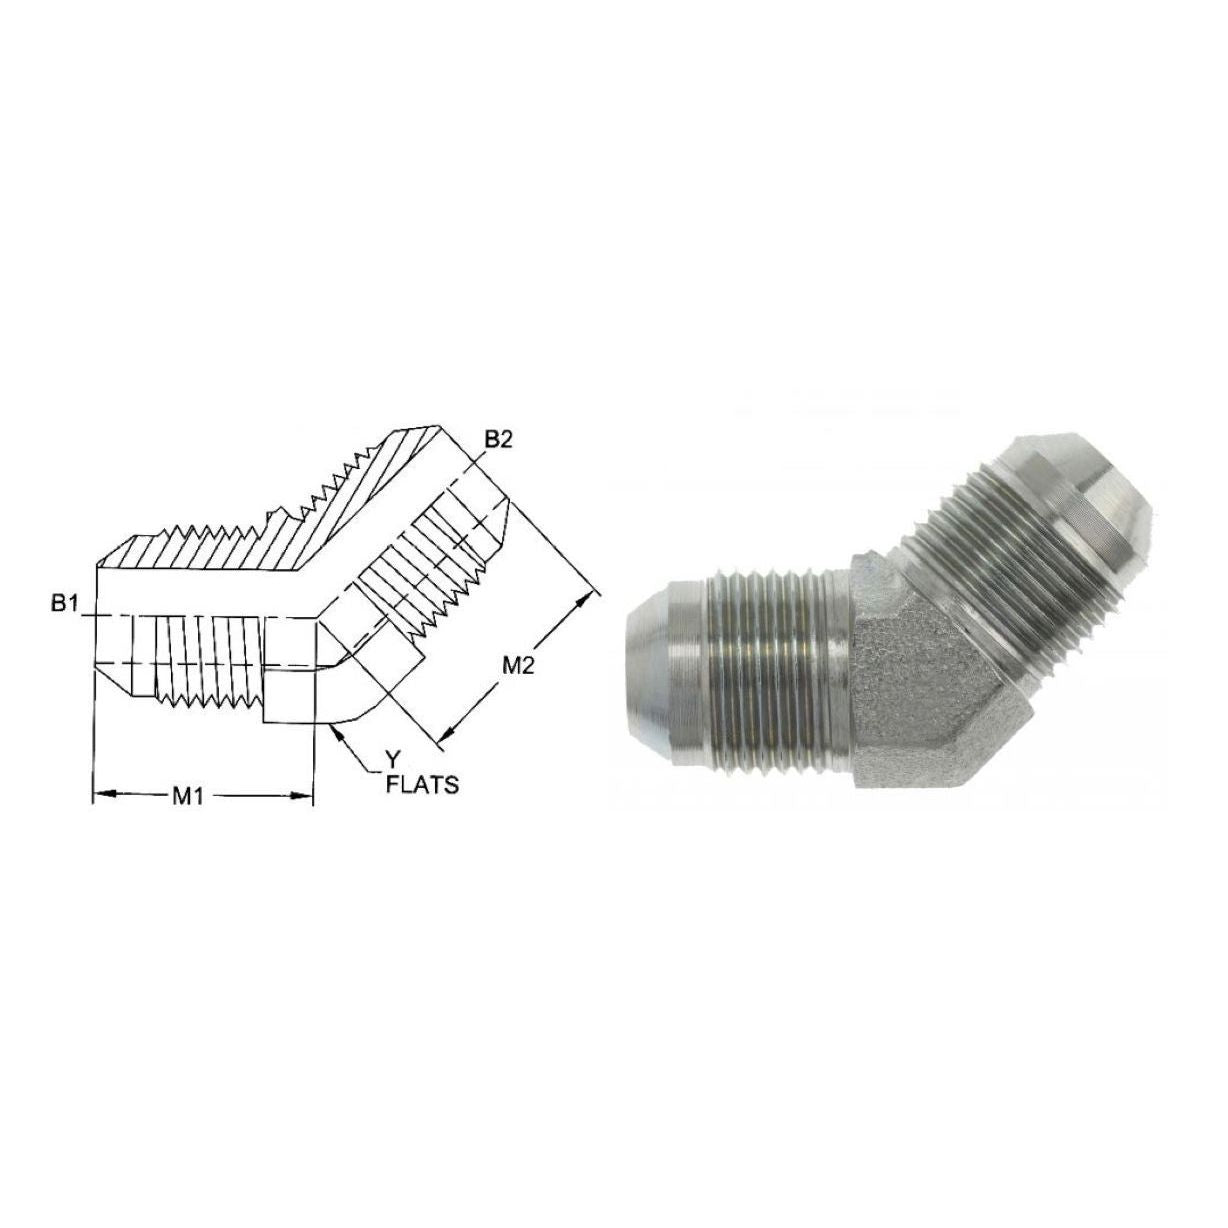 2504-12-12-SS : OneHydraulics 45-Degree Elbow, 0.75 (3/4) Male JIC x 0.75 (3/4) Male JIC, Stainless Steel, 6000psi